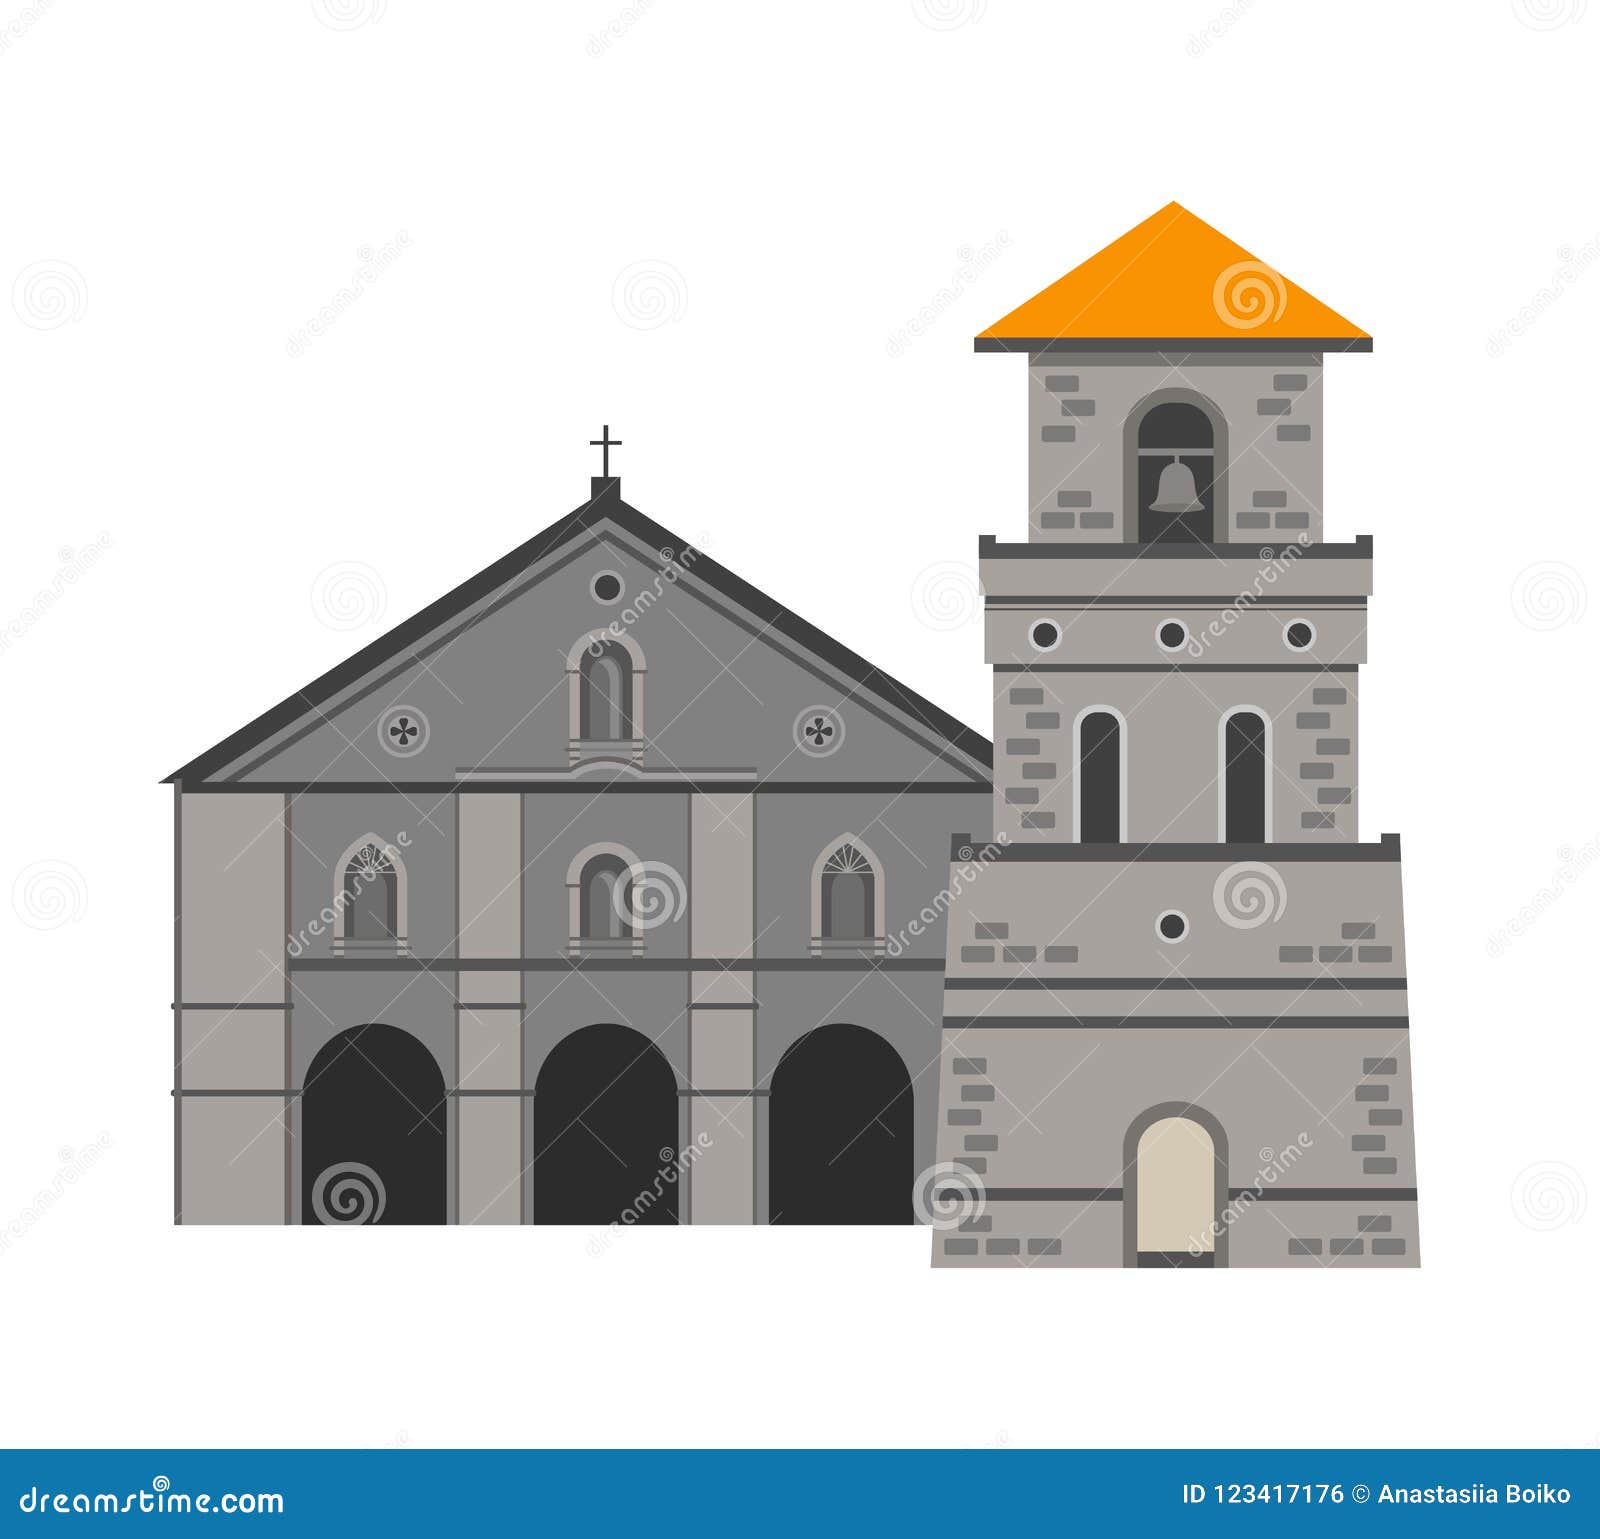 How to draw a church | Step by step Drawing tutorials